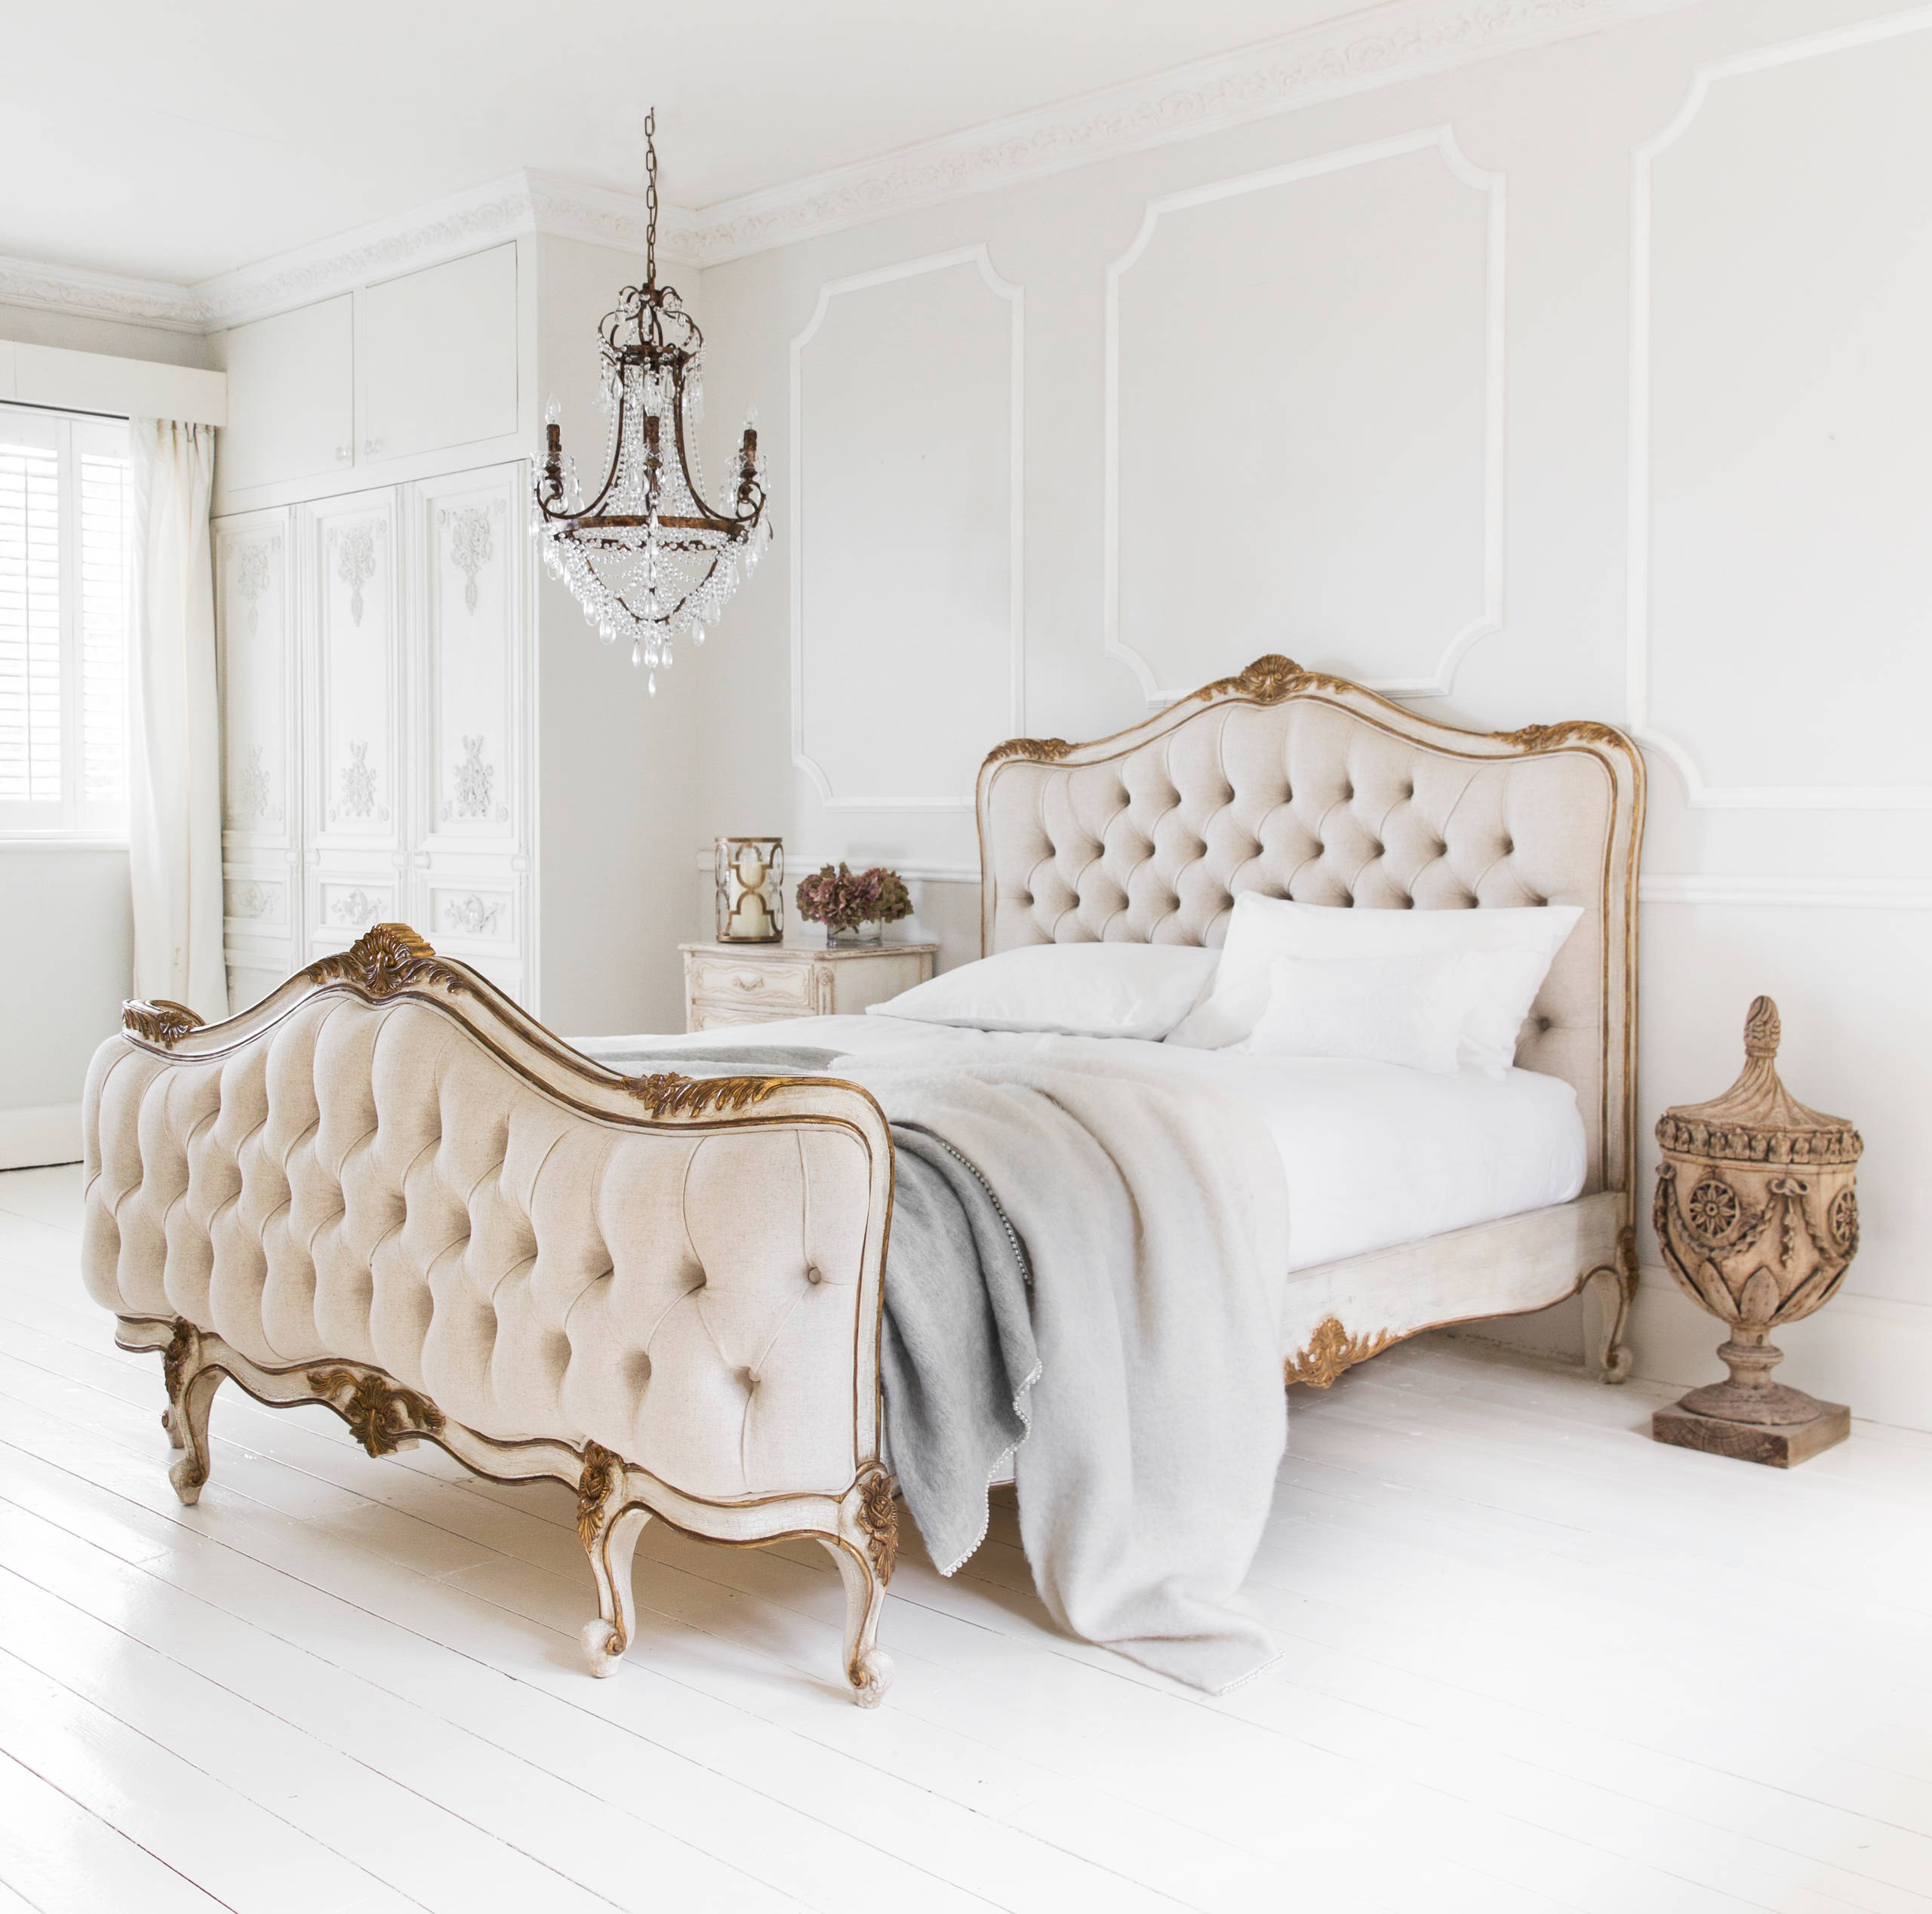 3 Secrets To French Decorating: Versailles Inspired Rooms ...